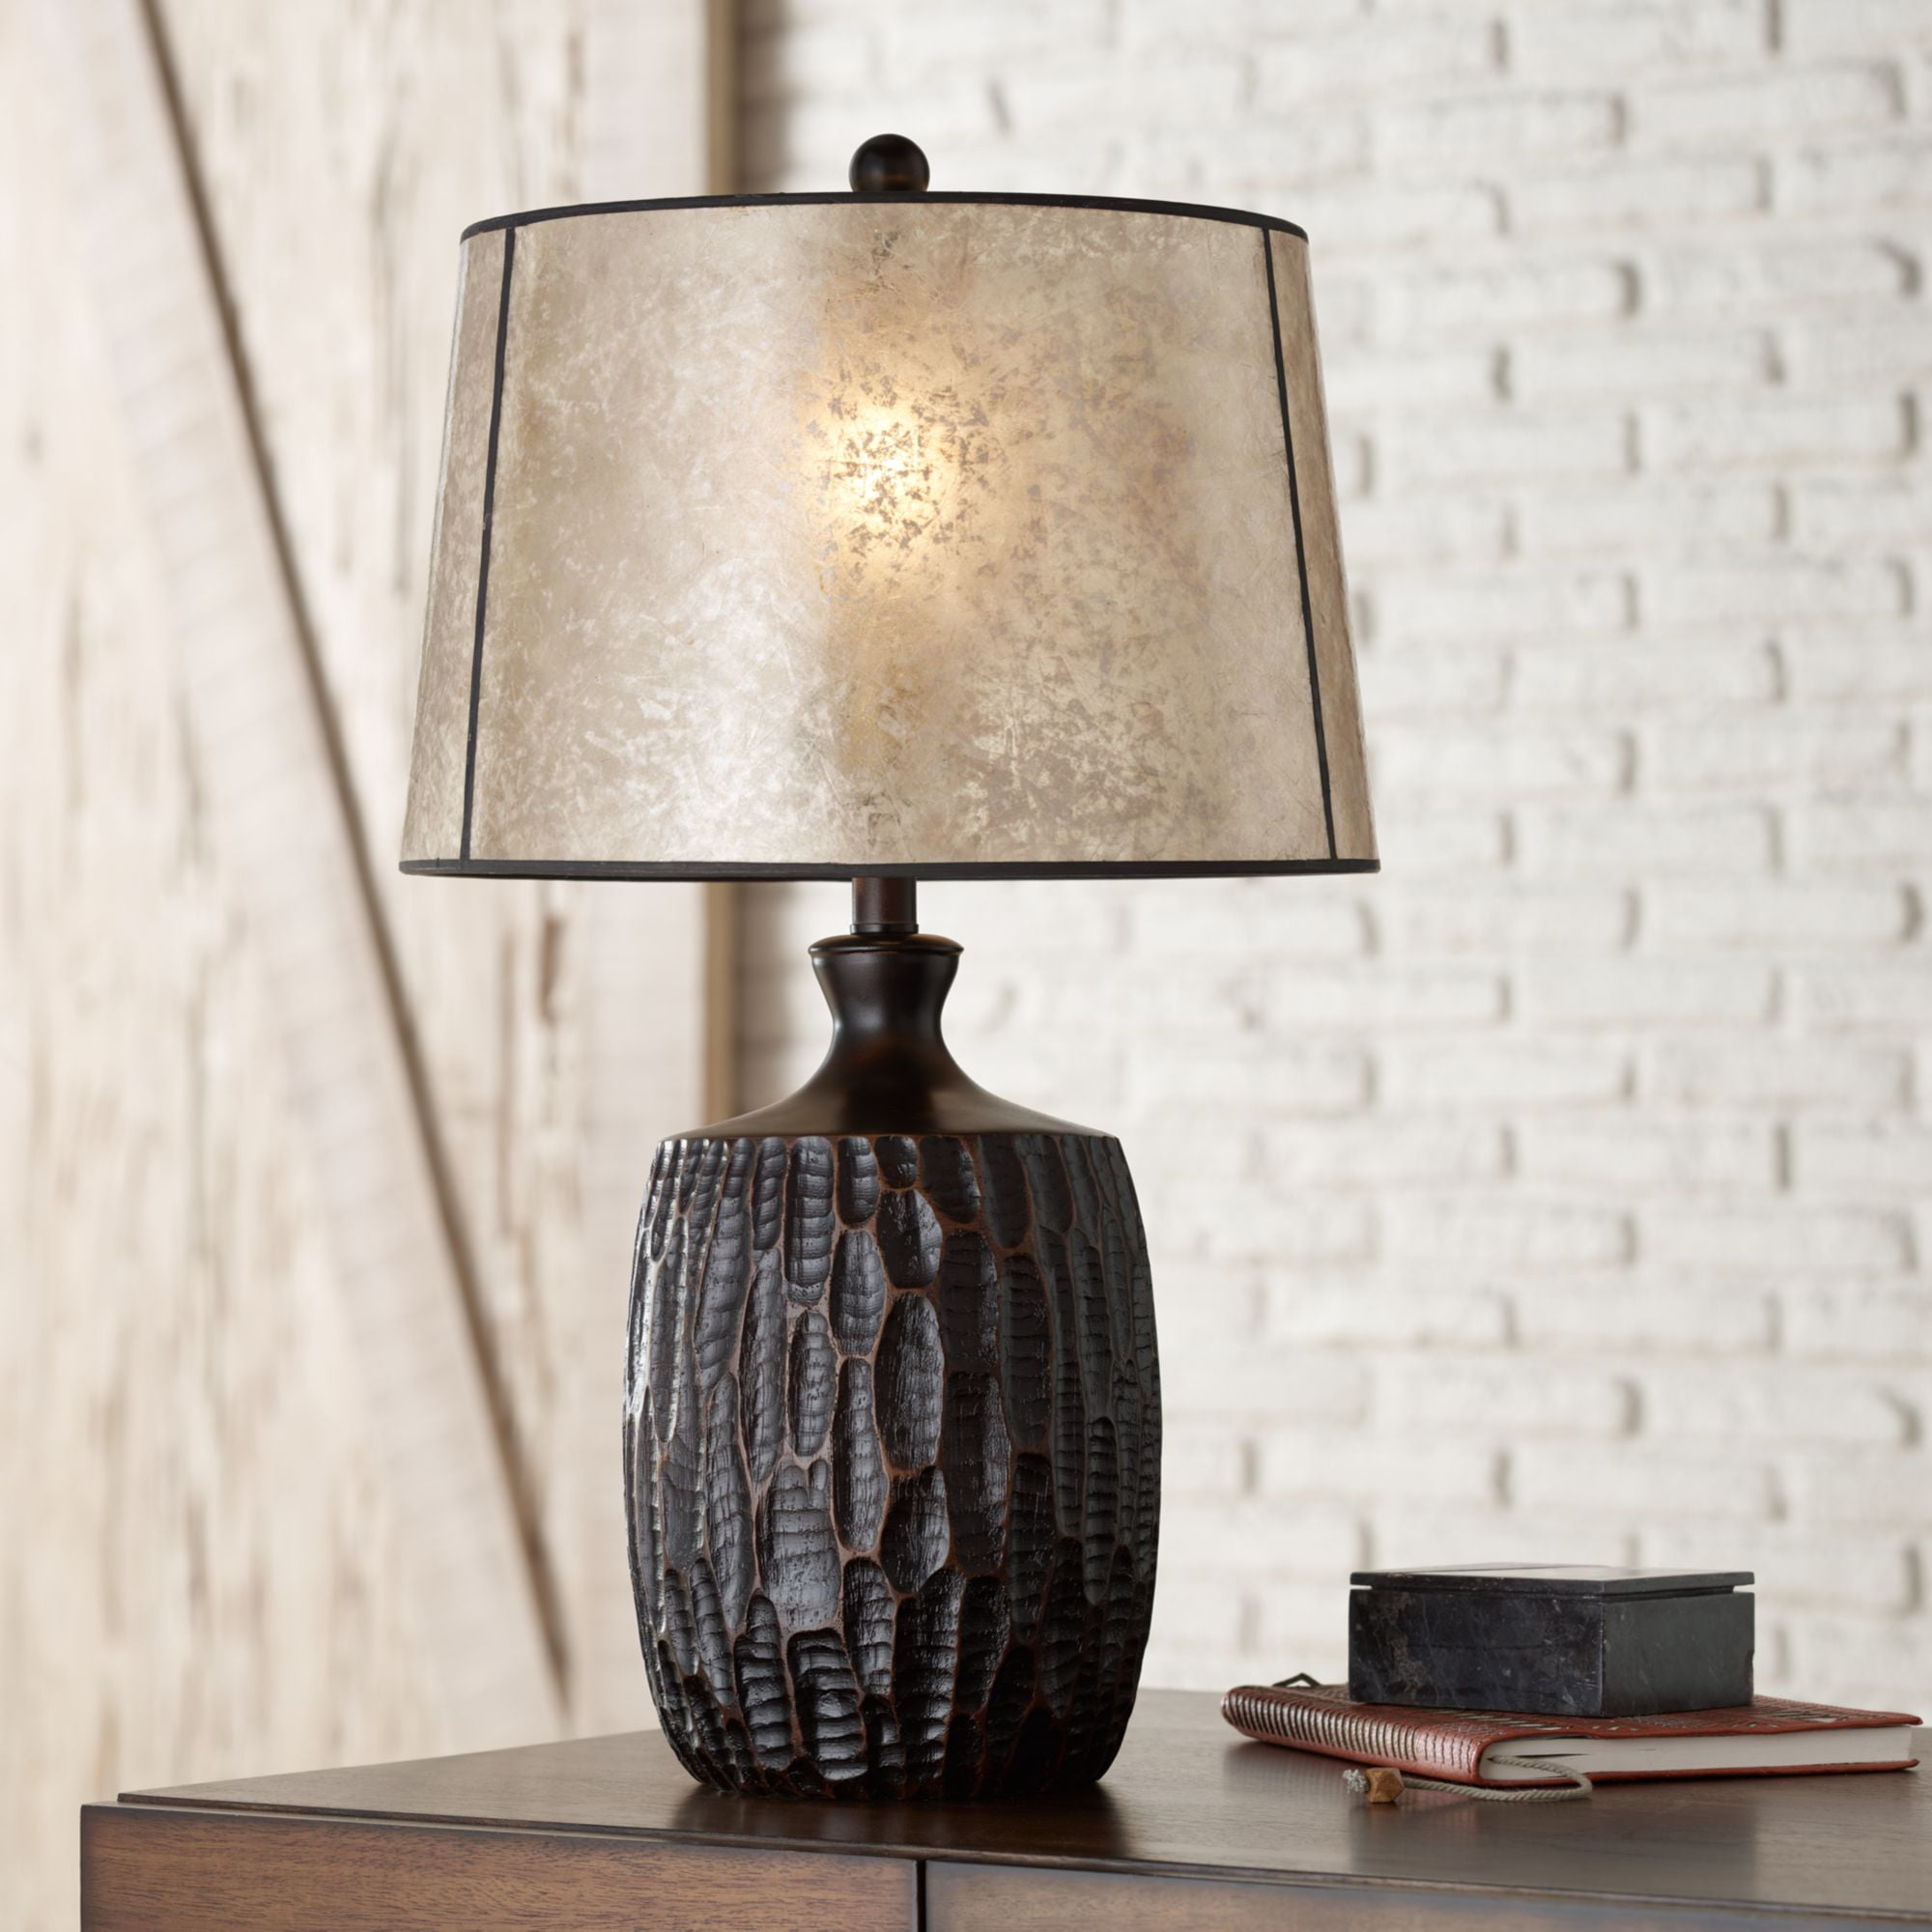 Franklin Iron Works Rustic Table Lamp, Rustic Bedside Table Lamps